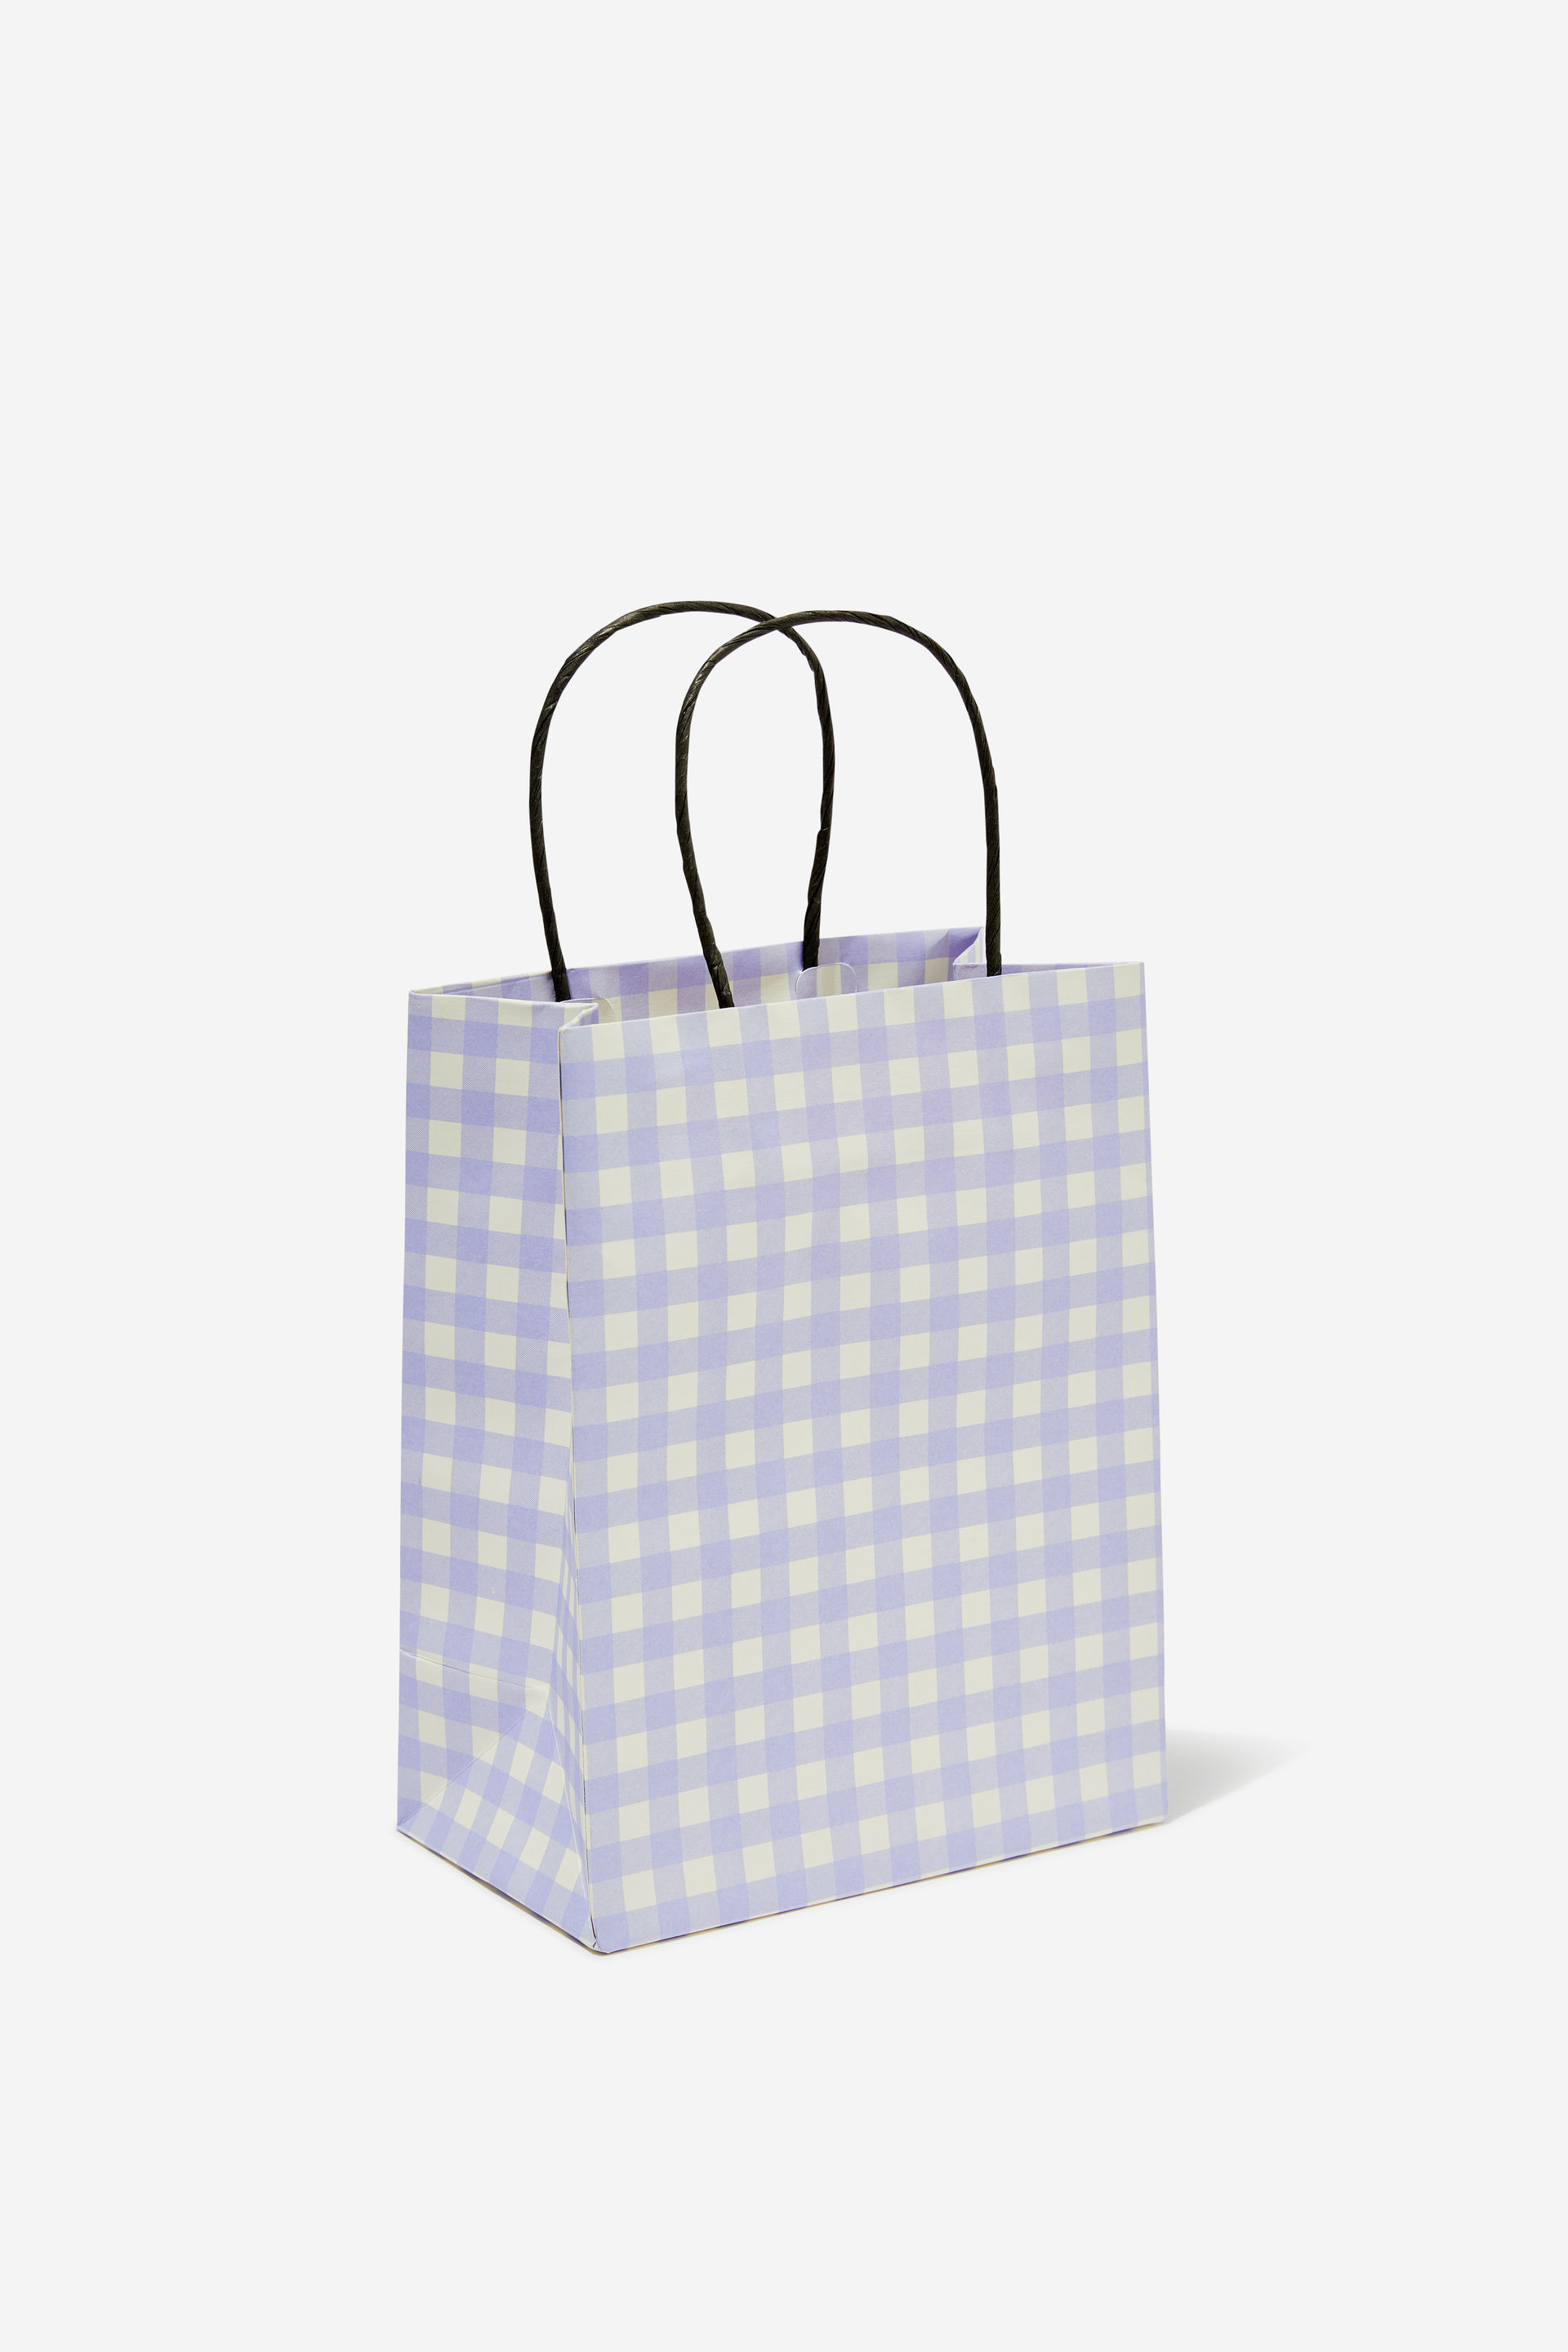 Typo - Get Stuffed Gift Bag - Small - Soft lilac gingham